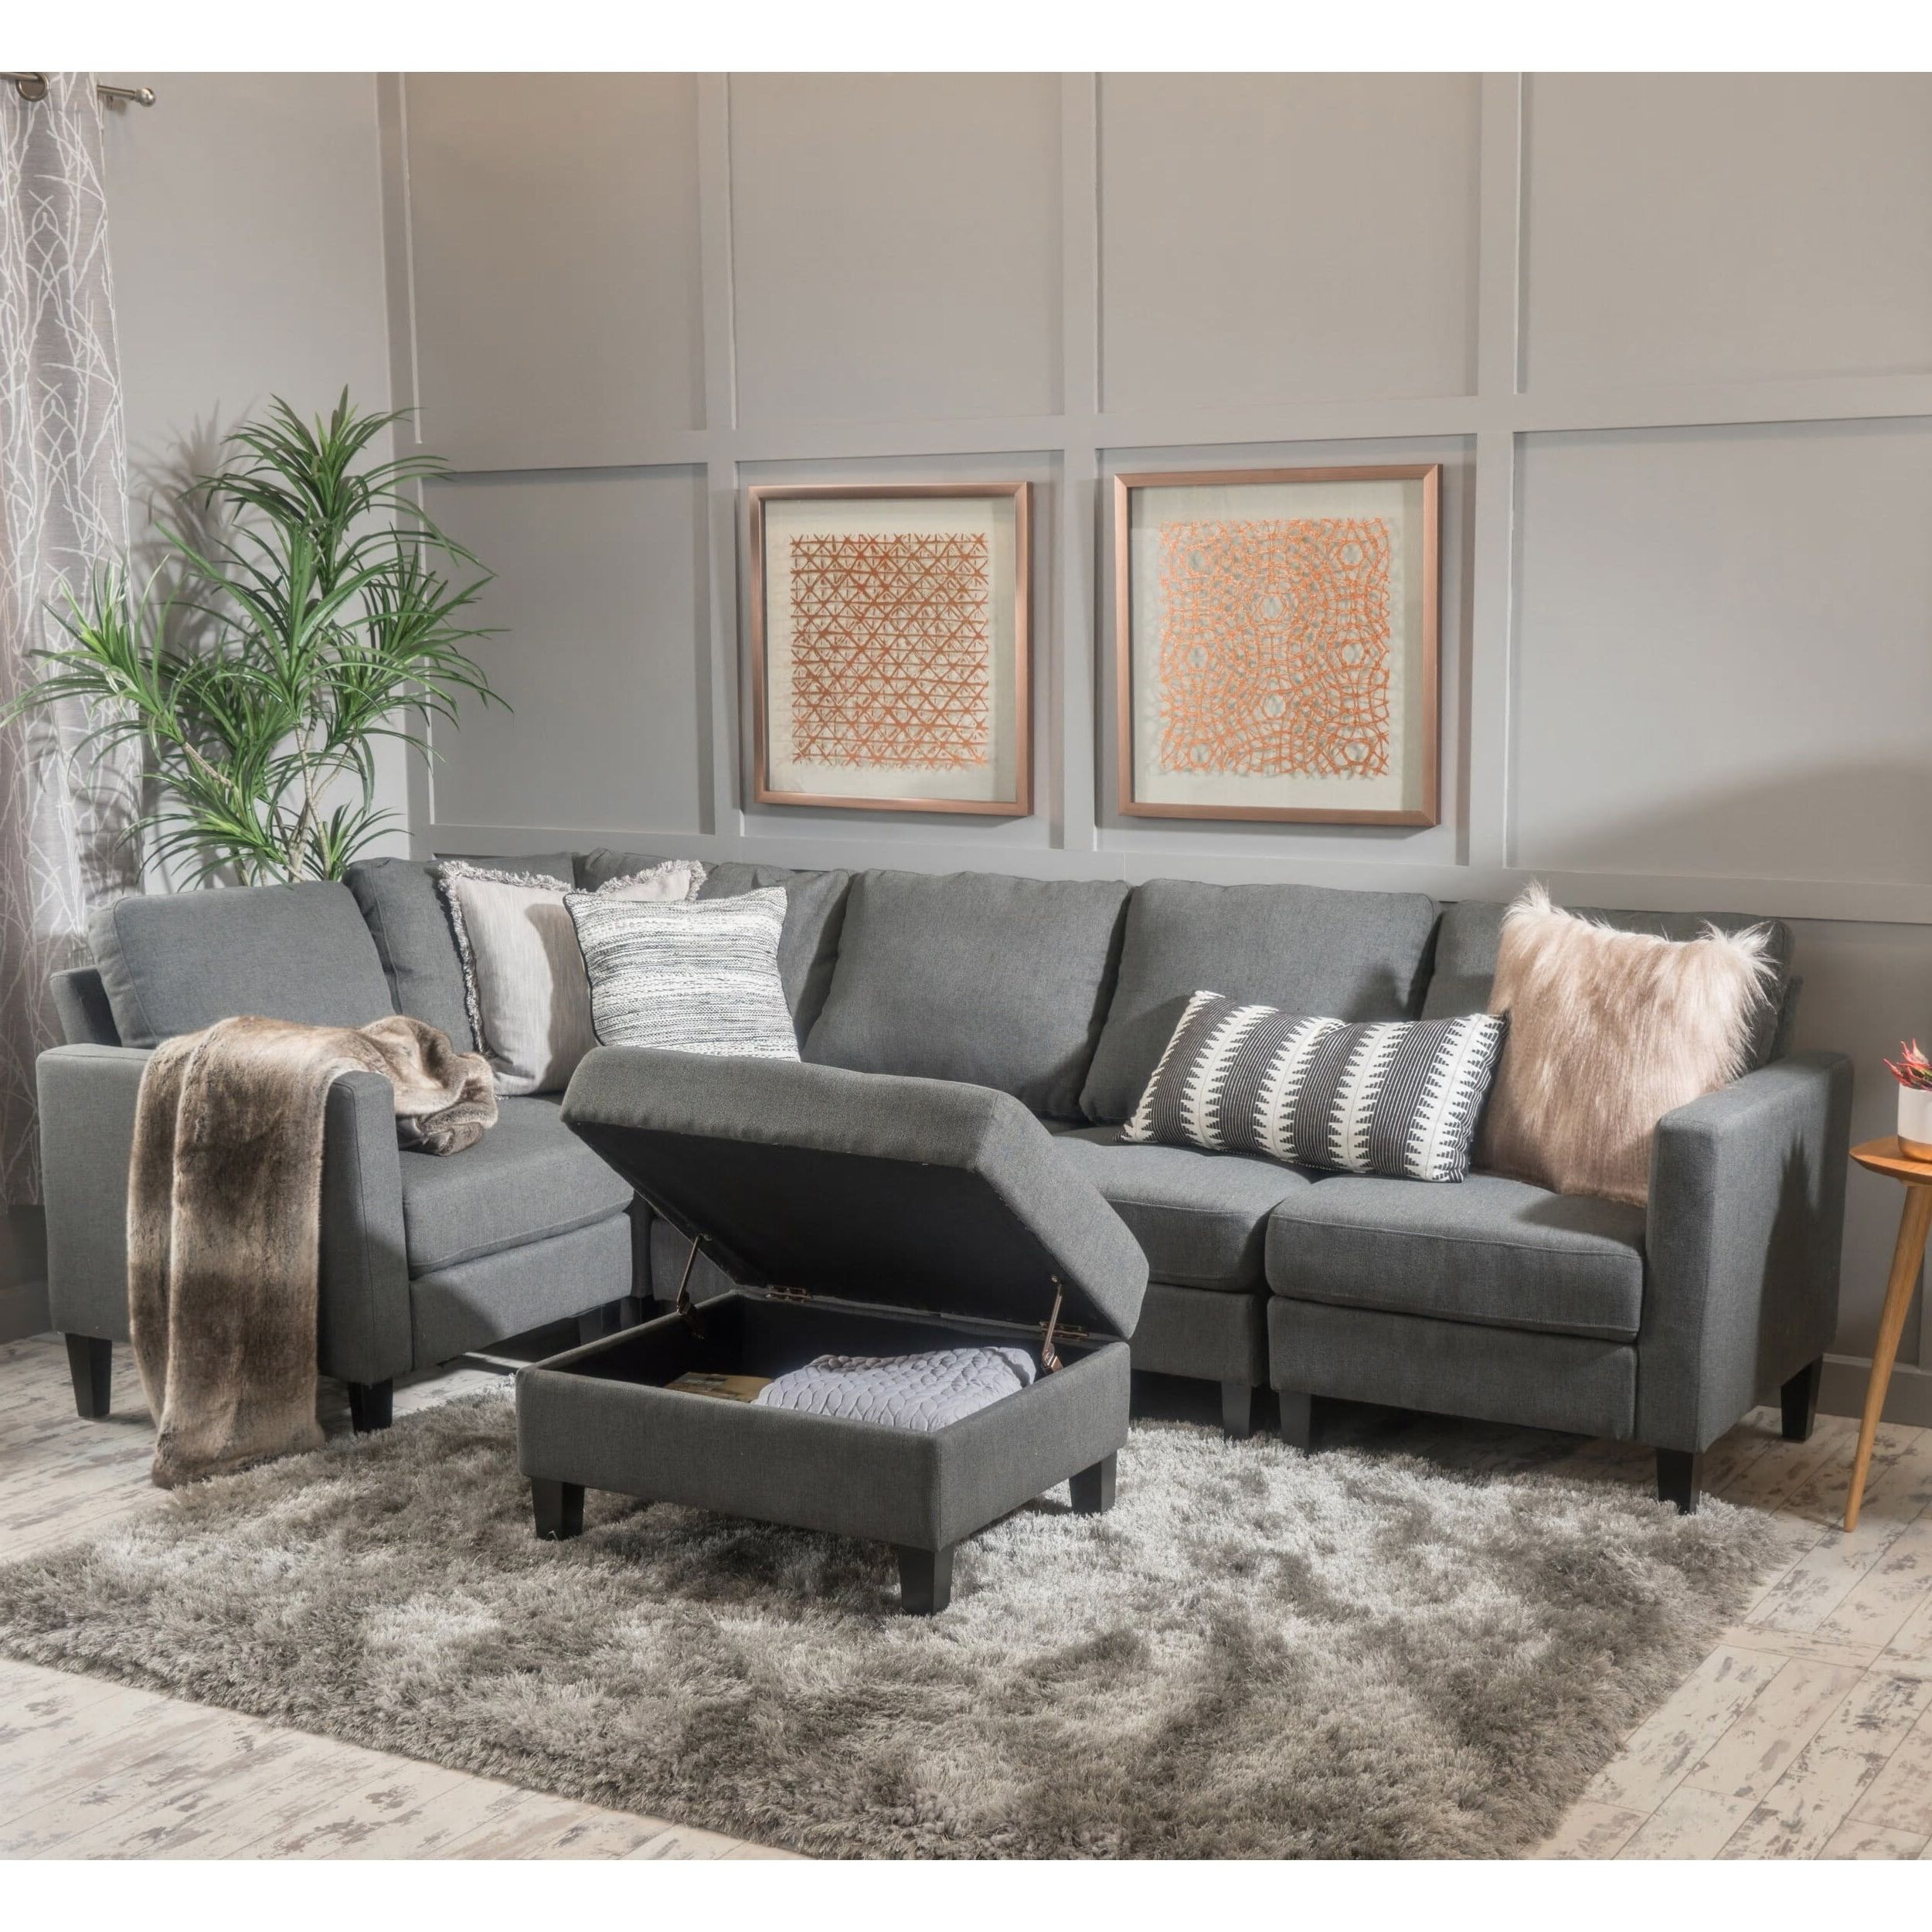 Sofas With Ottomans Within Famous Christopher Knight Home Zahra 6 Piece Sofa Sectional With Storage (View 5 of 15)